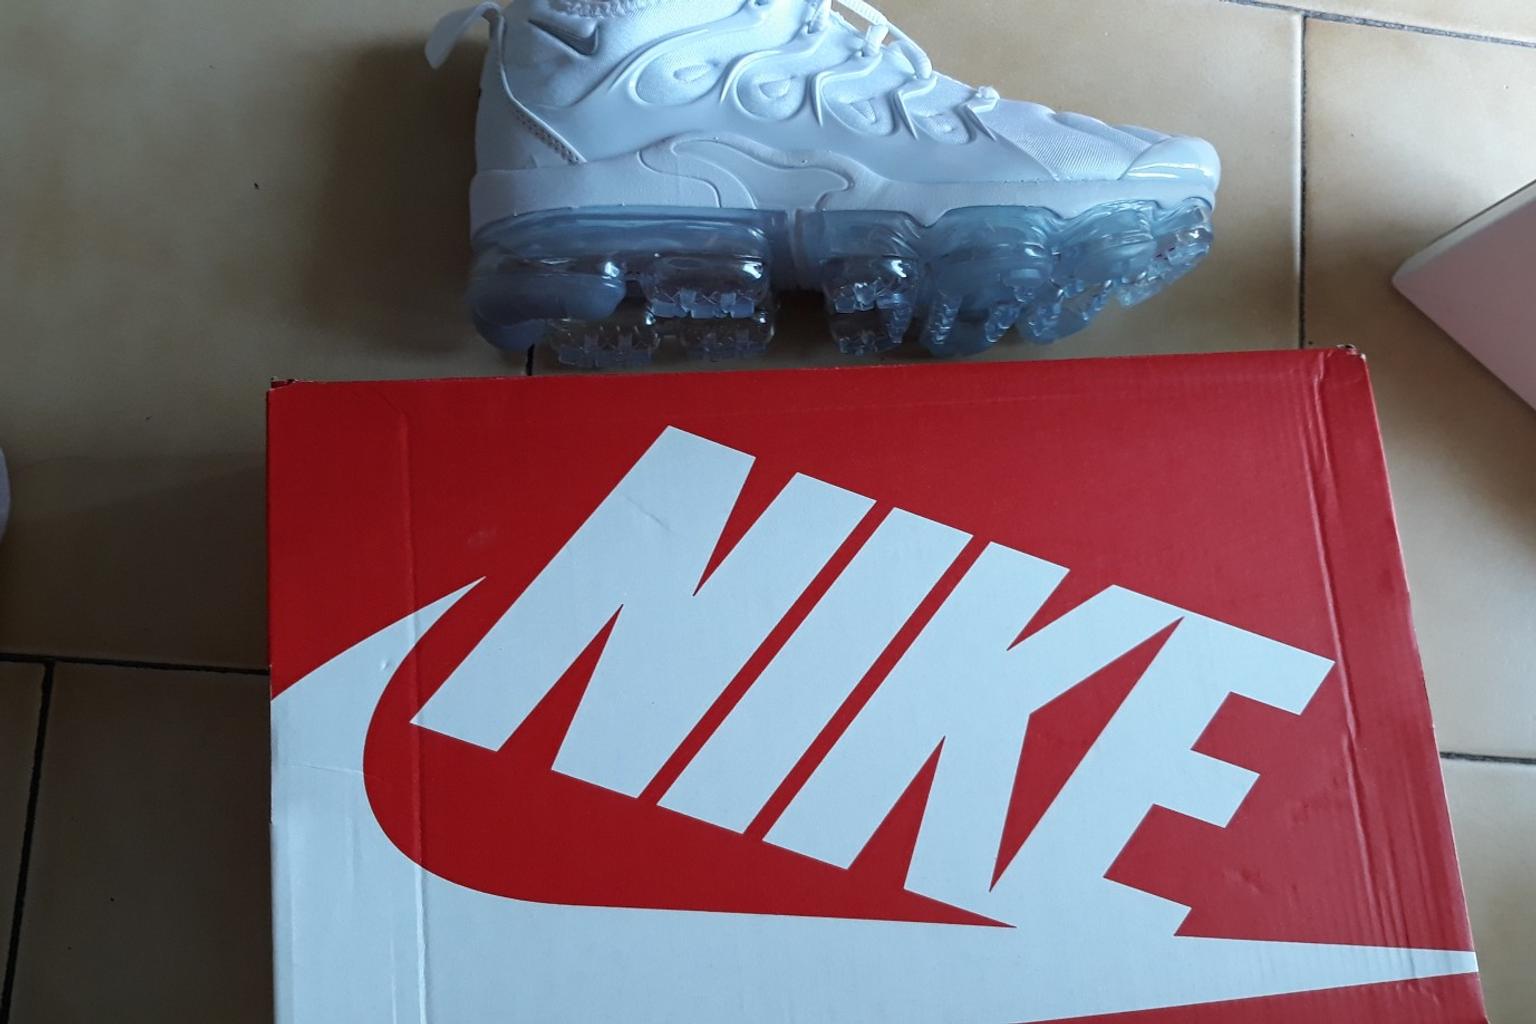 NIKE VAPORMAX PLUS N°40 NUOVE CON SCATOLA. in 25034 Orzinuovi for €100.00  for sale | Shpock